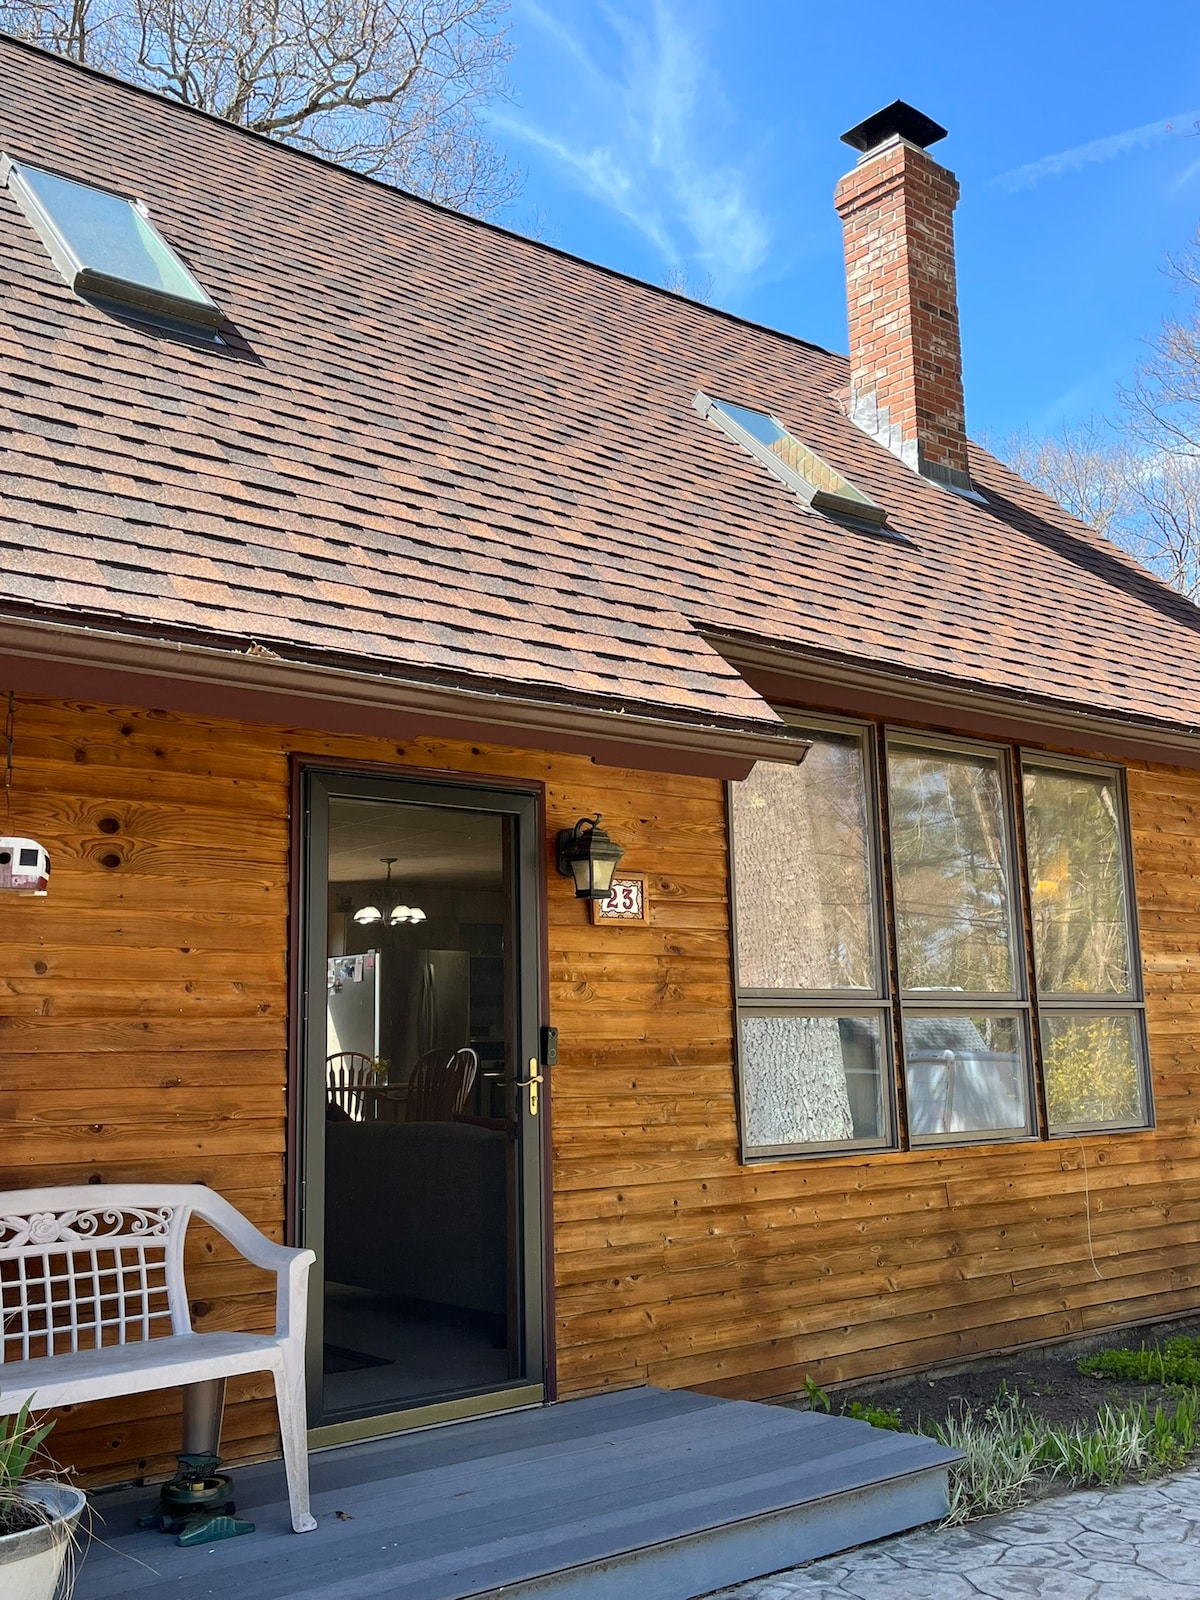 3-bedroom cottage in serene Lake Bunggee area